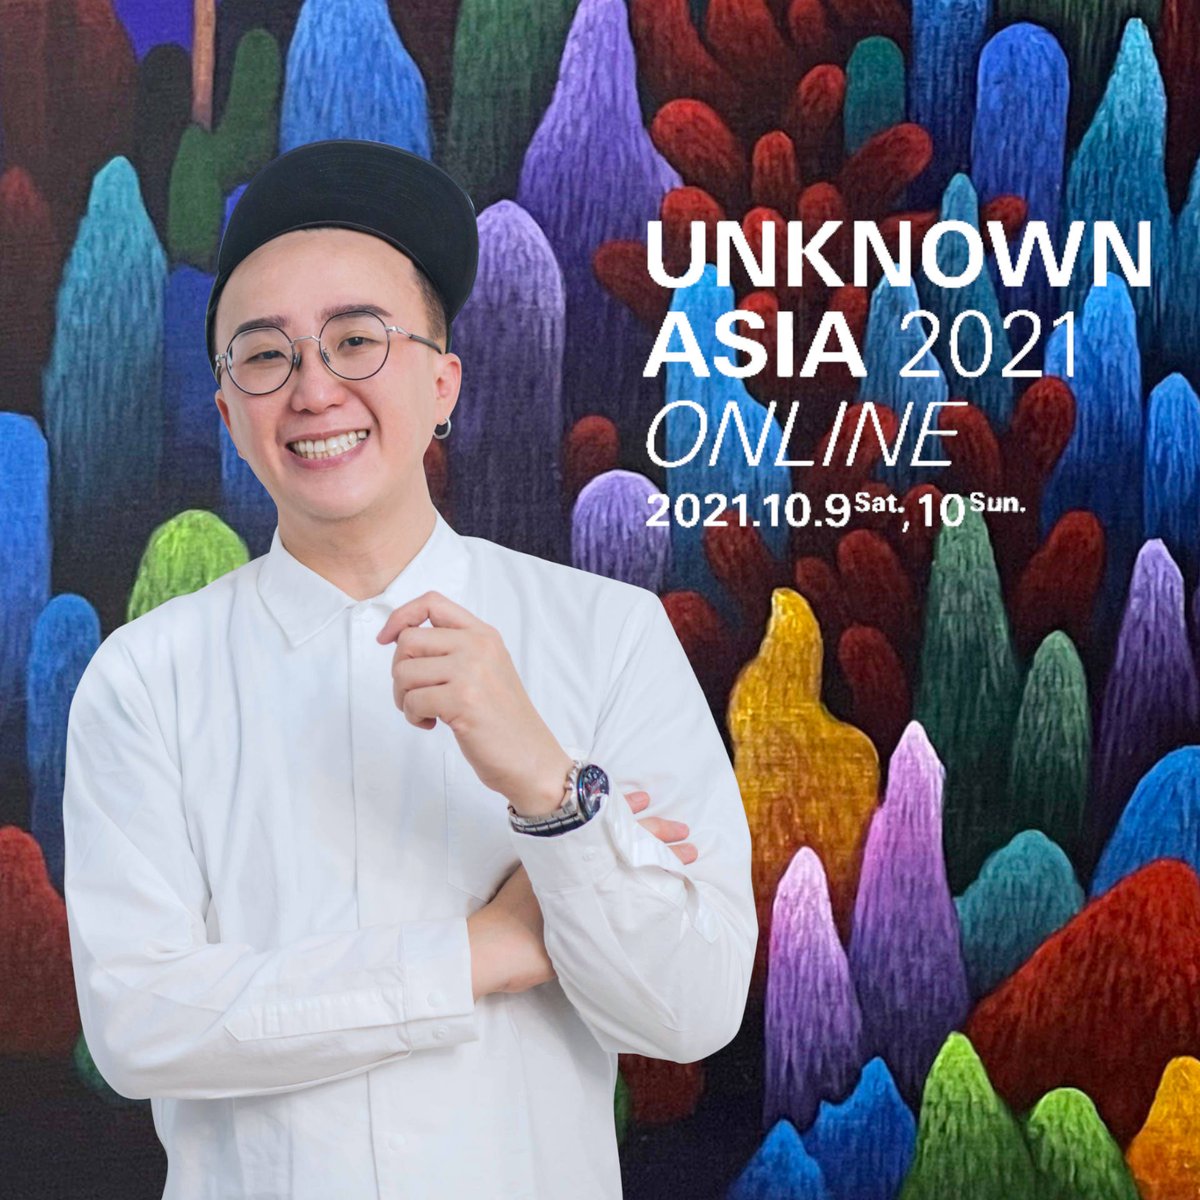 We are proud to announce that Alvin Yap has been chosen to join UNKNOWN ASIA ONLINE 2021 in Japan. Come and support #yuyu adventure at bit.ly/UNKNOWNASIA this weekend. 

#chunyuart #unknownasia2021 #voteforyuyu #ContemporaryArt #Tomorrowland #SupportYourArtist #acrylic